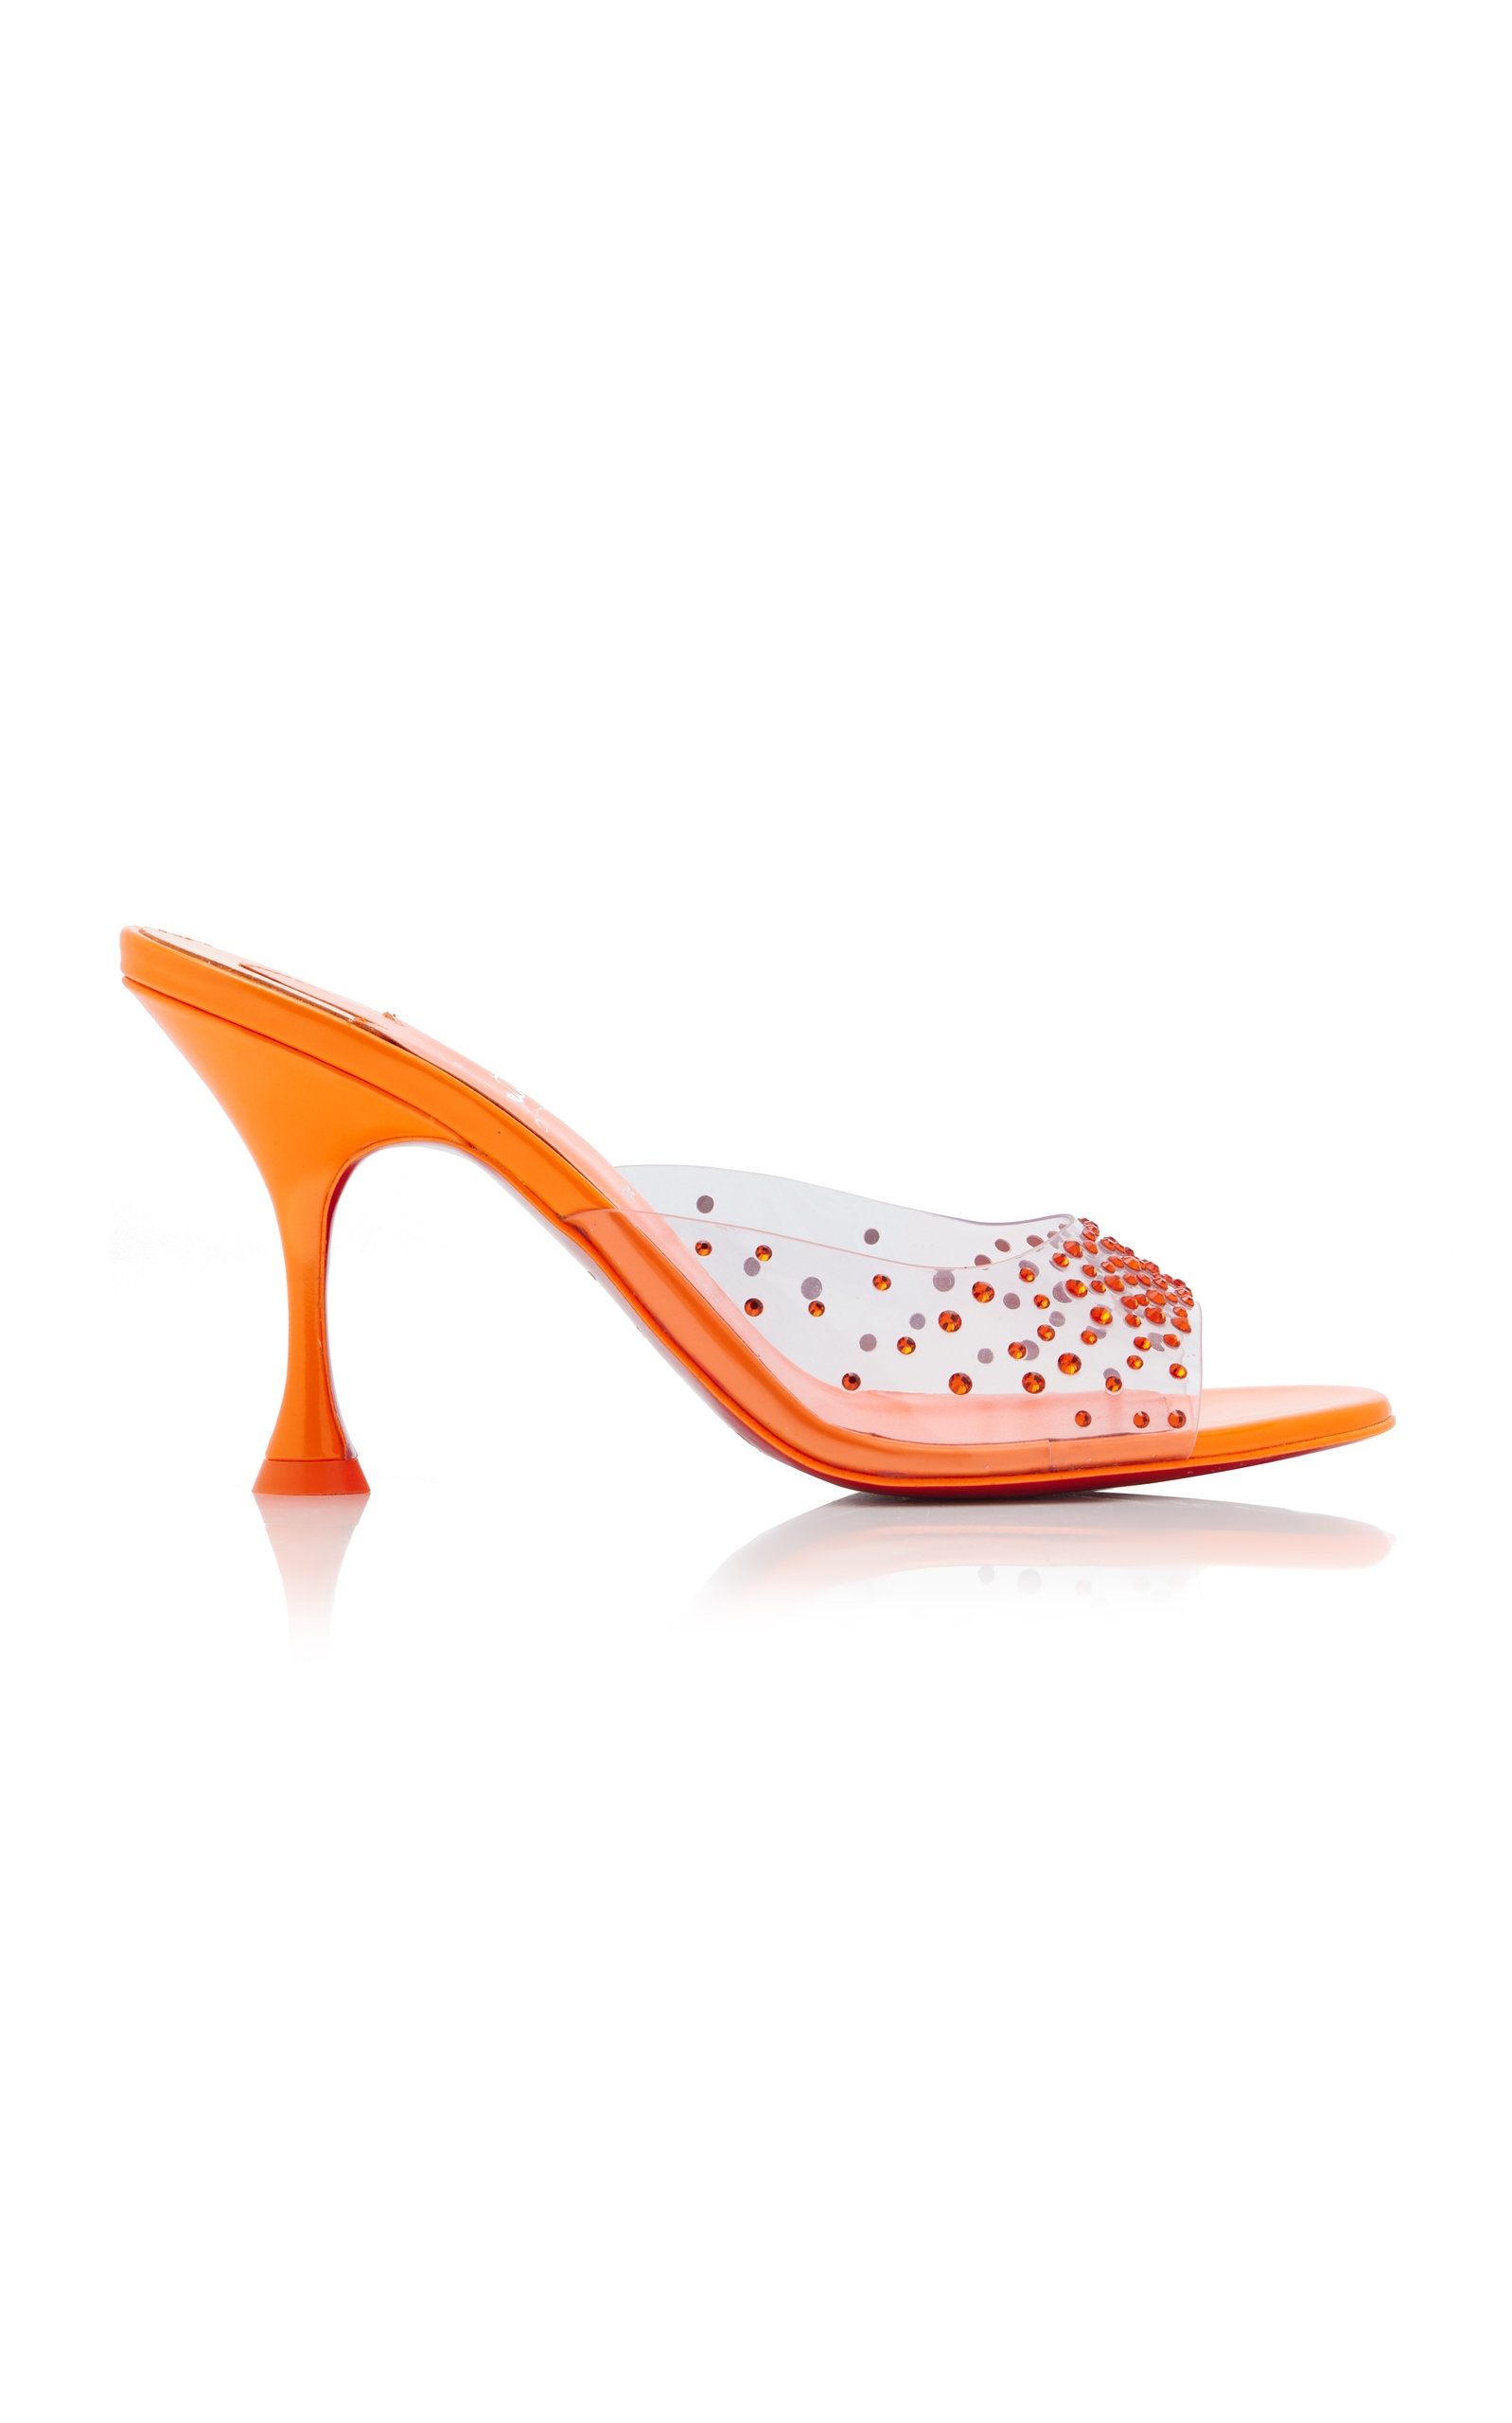 Degramule Strass Patent Leather and PVC Sandals orange - 1